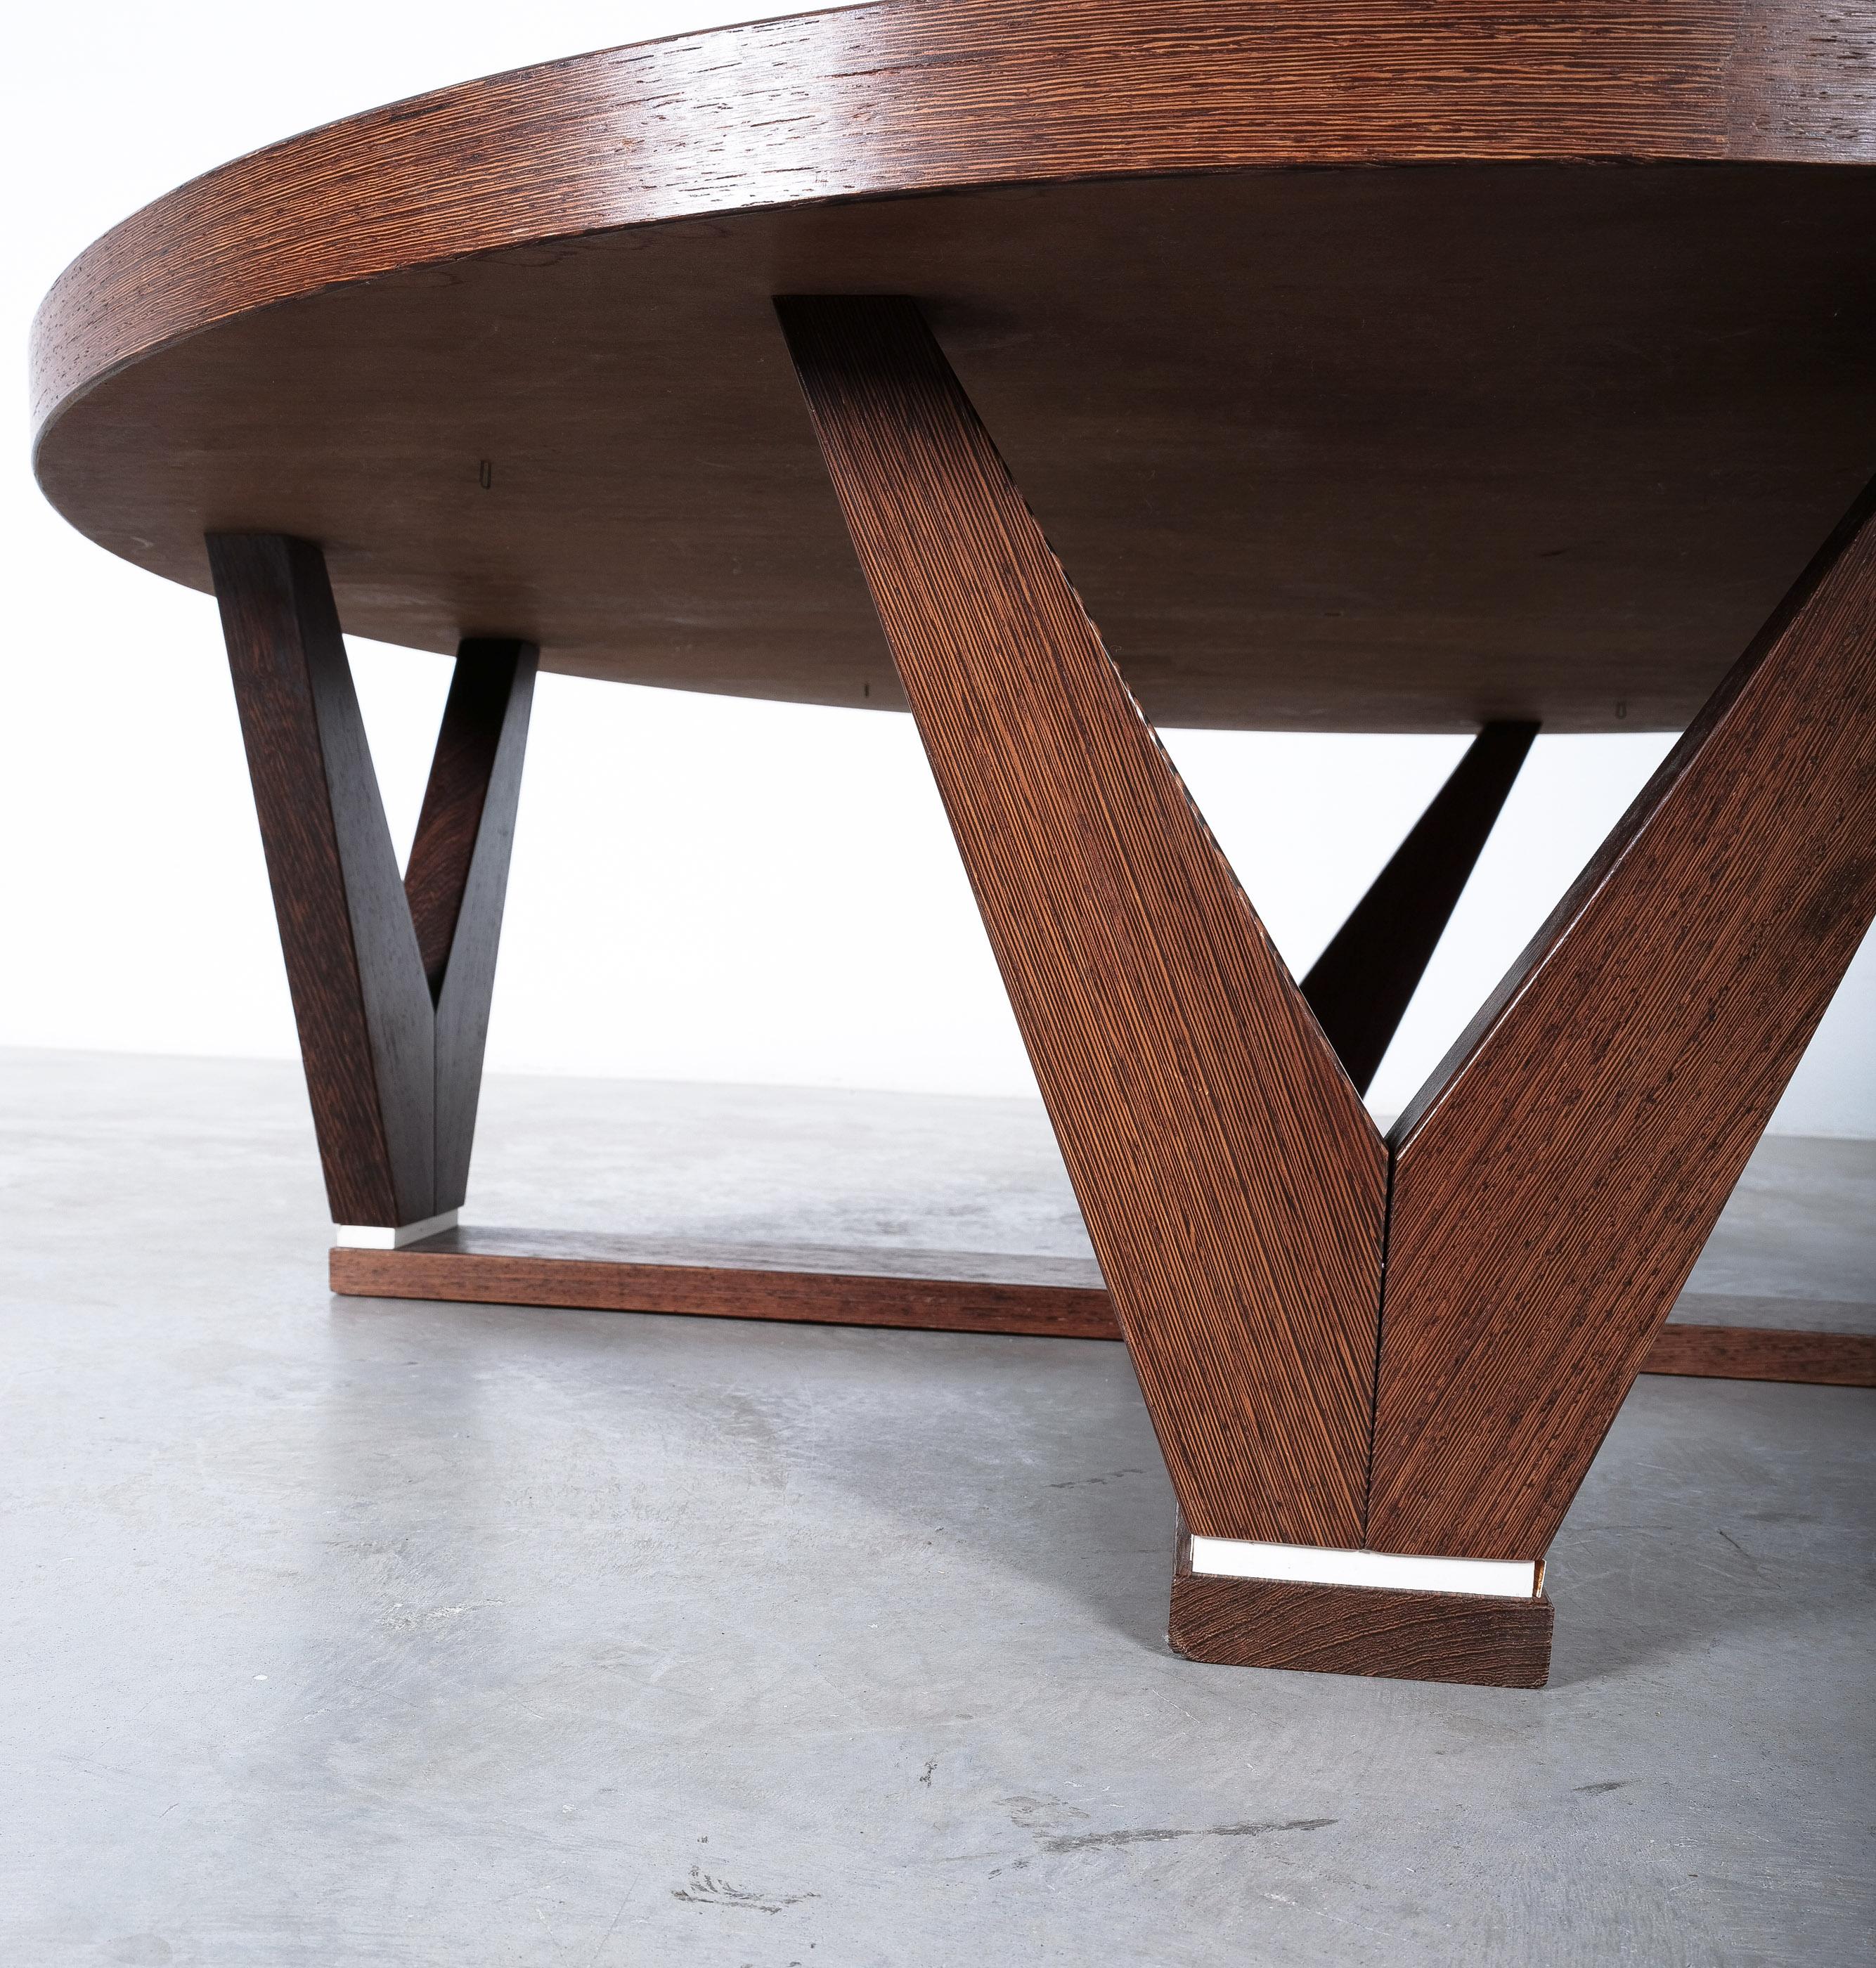 Mid-20th Century Round Wenge Wood Coffee Table, France, circa 1960